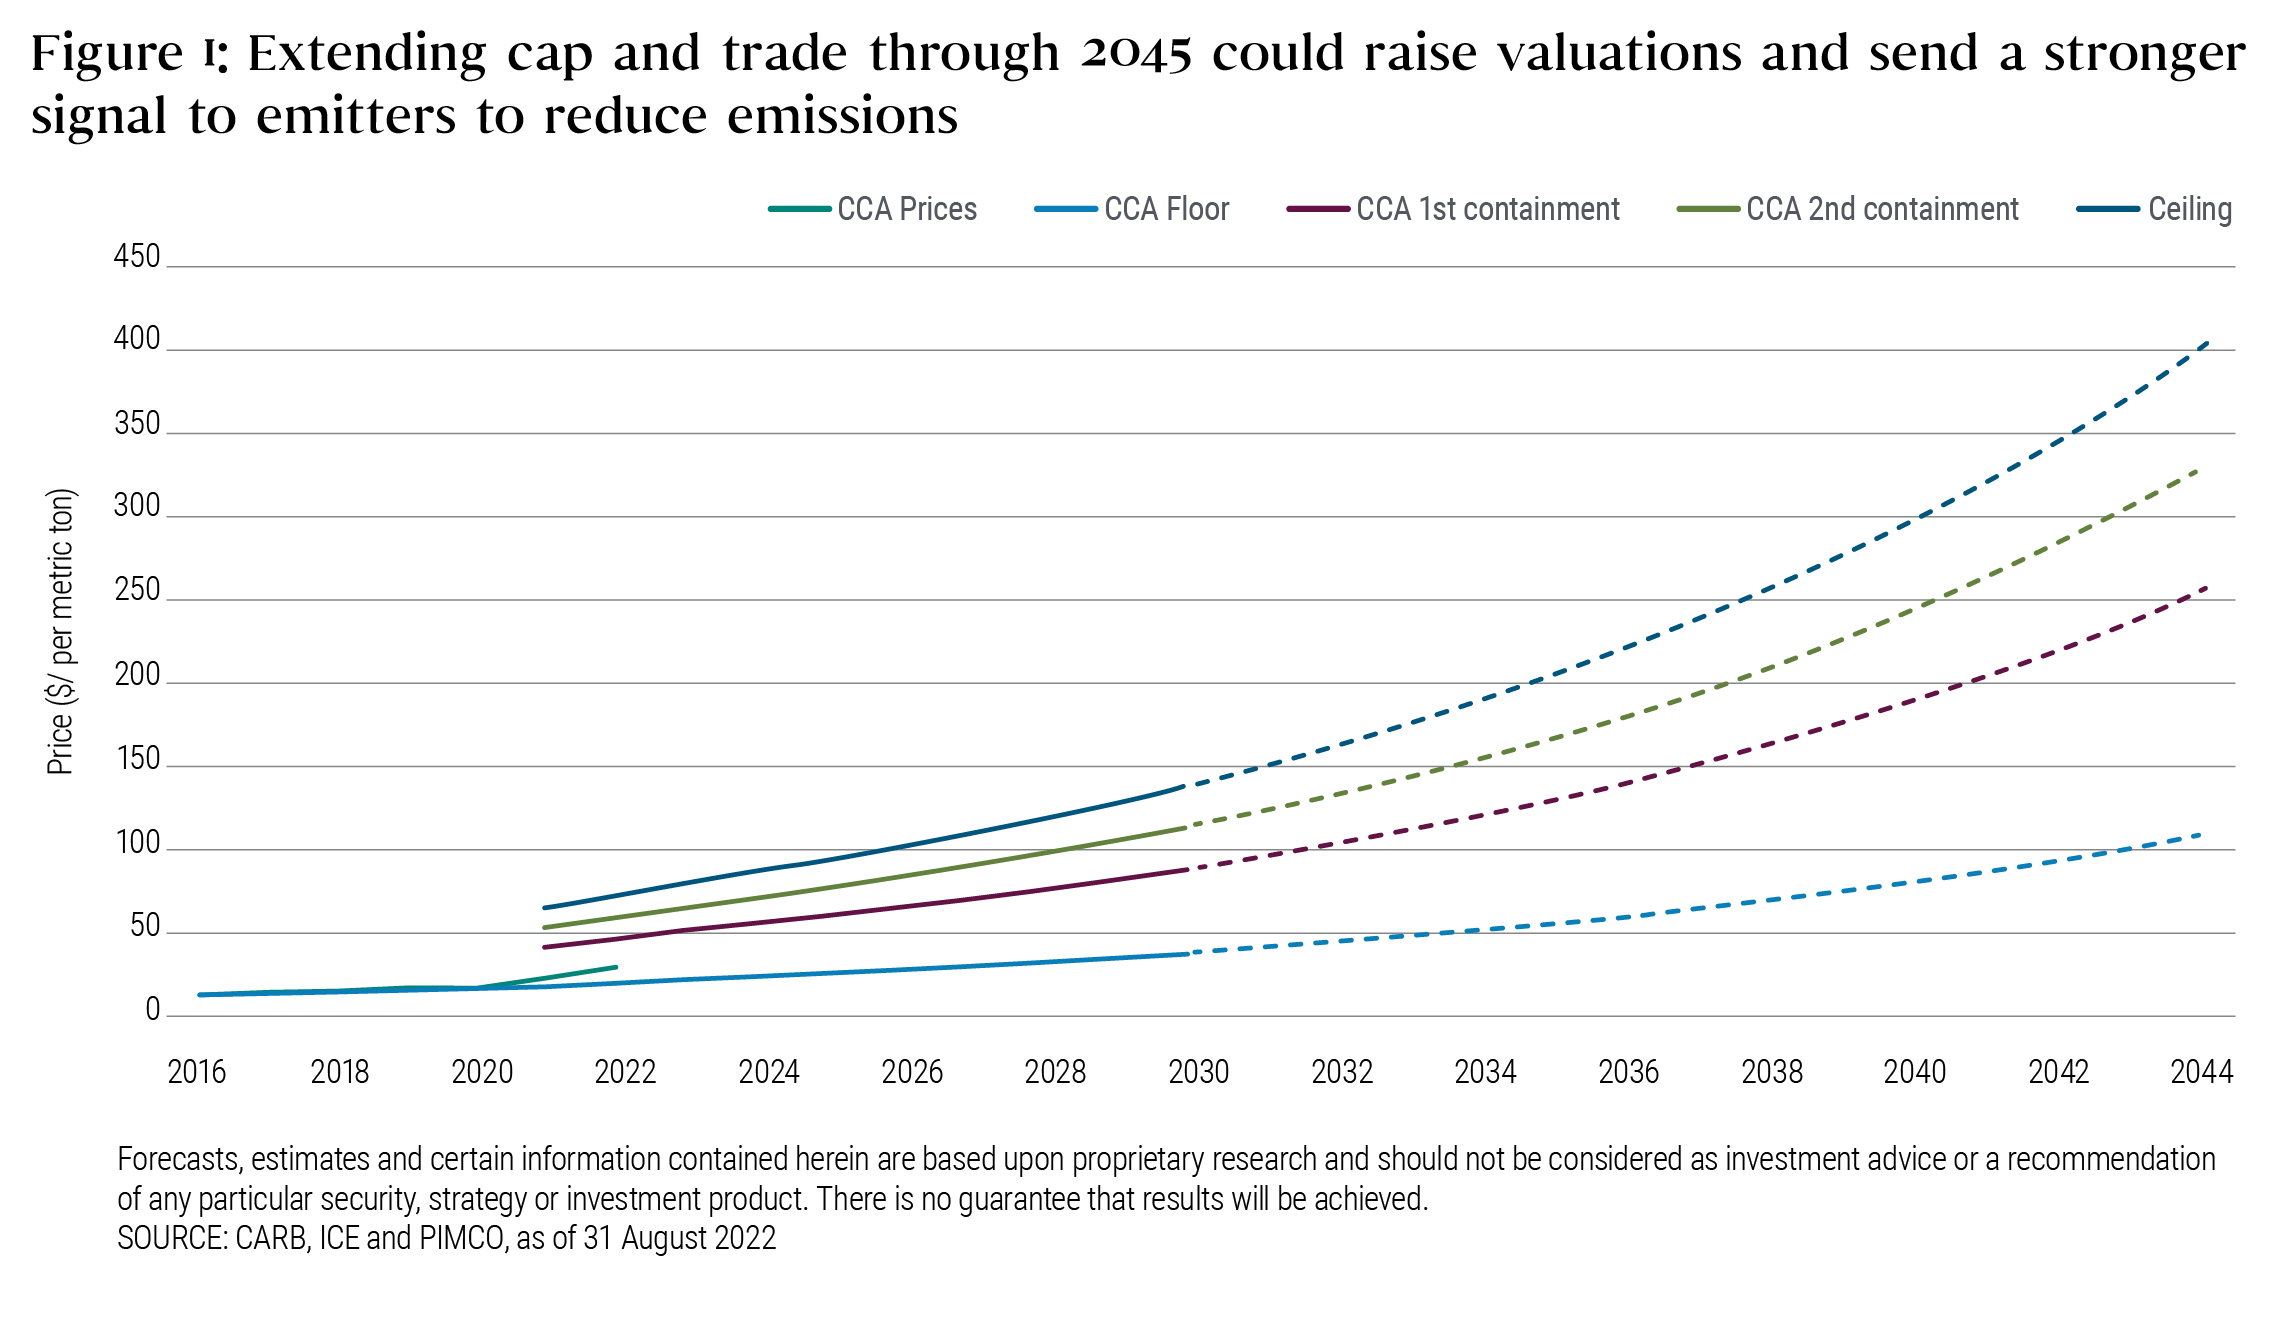 This chart shows five lines extending left to right on the x-axis (representing years 2016 to 2045), and upward on the y-axis (representing California carbon allowance prices, from $0 to $450 per metric ton). From current levels ranging from about $20 to $72, four of the lines – which represent auction floor prices, two levels of auction reserve prices, and a ceiling price – would rise to projected levels of about $37-$136 by 2030, and about $110-$404 under a program extension to 2045. The fifth line shows actual CCA prices through 31 August 2022, when they were about $30. Forecasts, estimates and certain information contained herein are based upon proprietary research and should not be considered as investment advice or a recommendation of any particular security, strategy or investment product. There is no guarantee that results will be achieved.